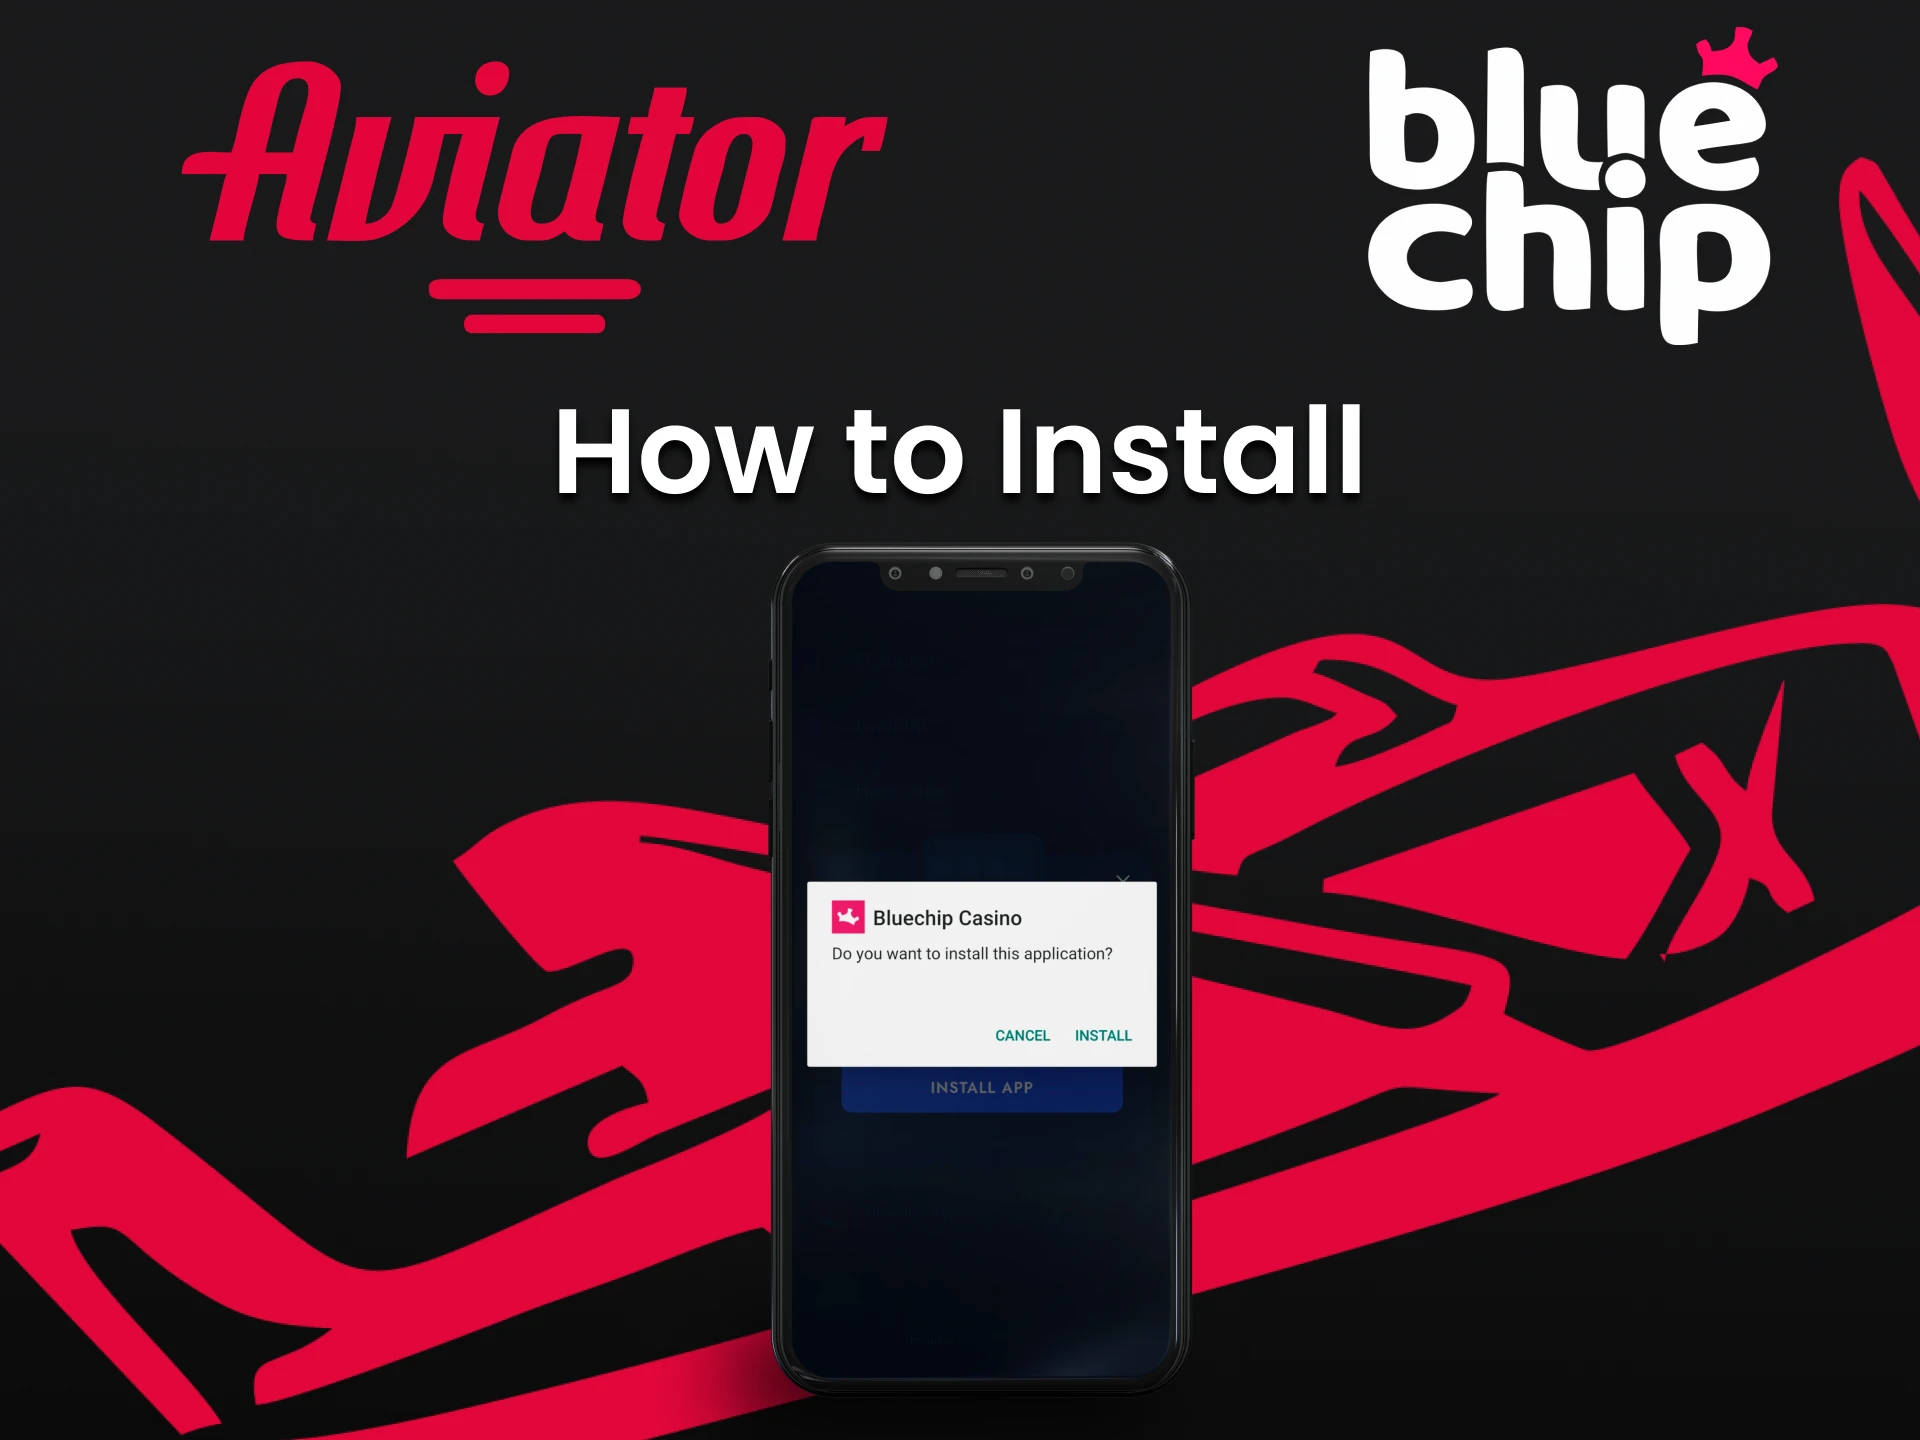 Install the application from Bluechip to play Aviator.